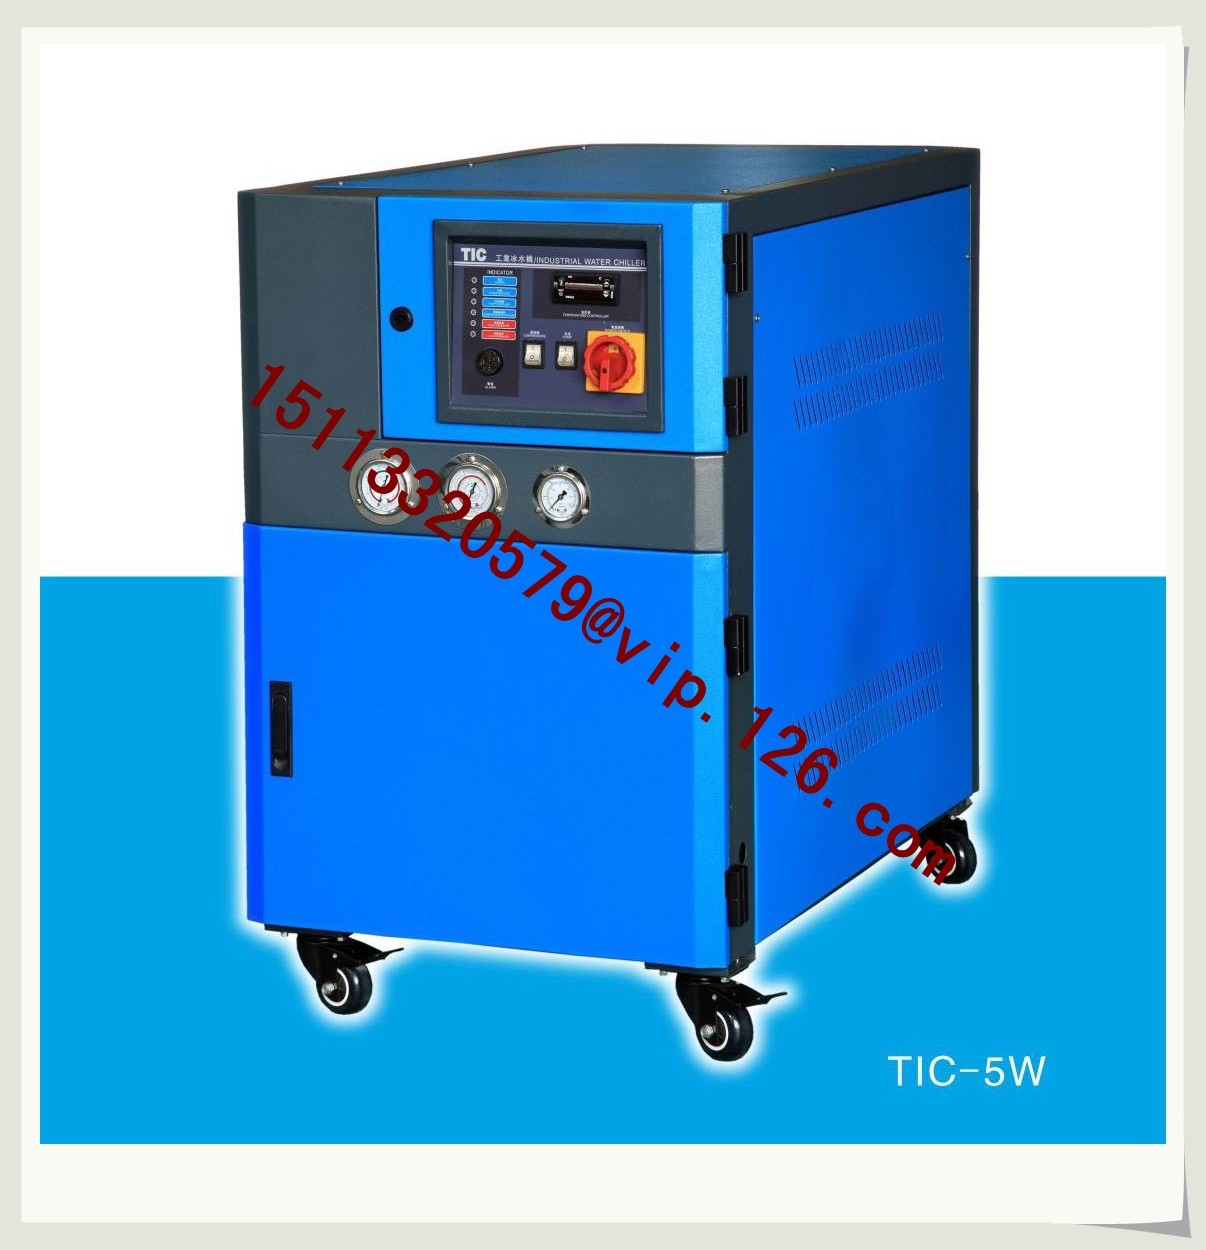 High Efficiency Water Cooled Water Chiller With Stainless Steel Water Tank